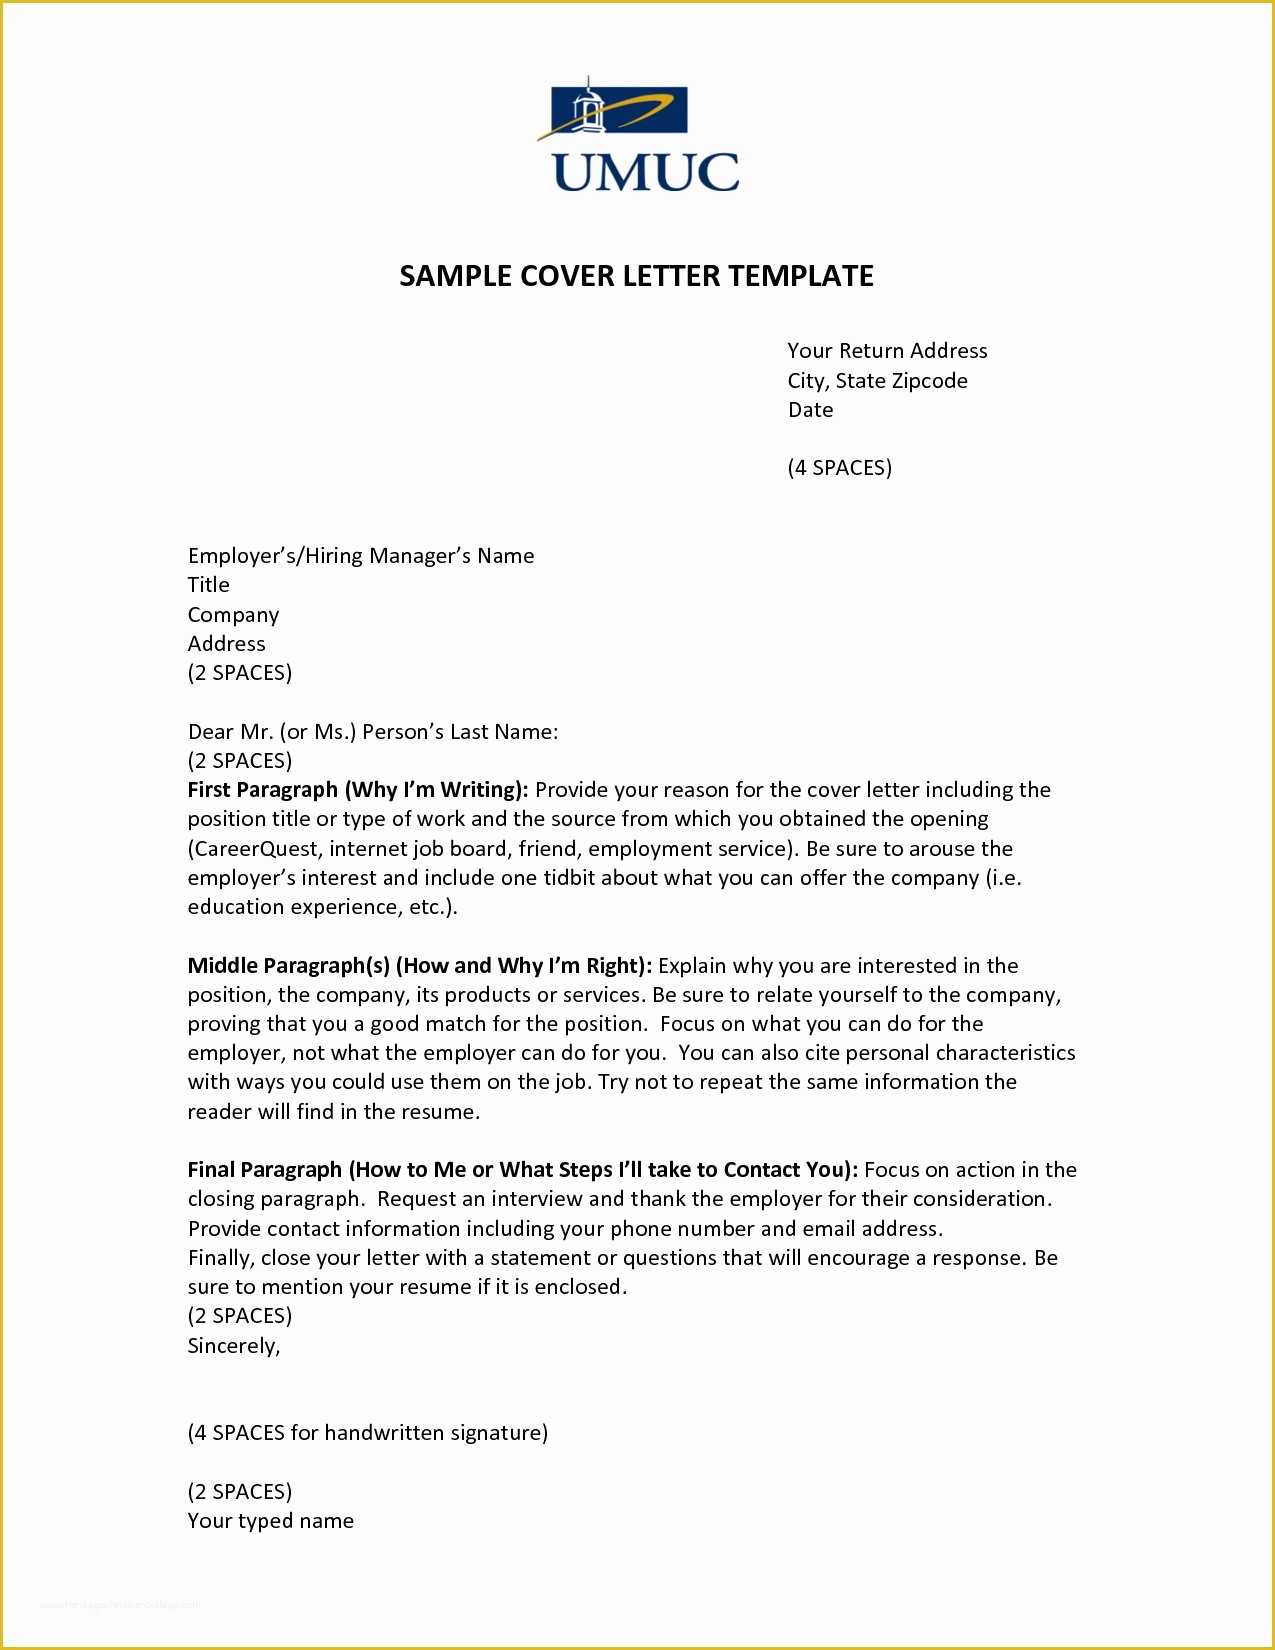 Free Cover Letter Template Of Sample Cover Letter Template Umucover Letter Template